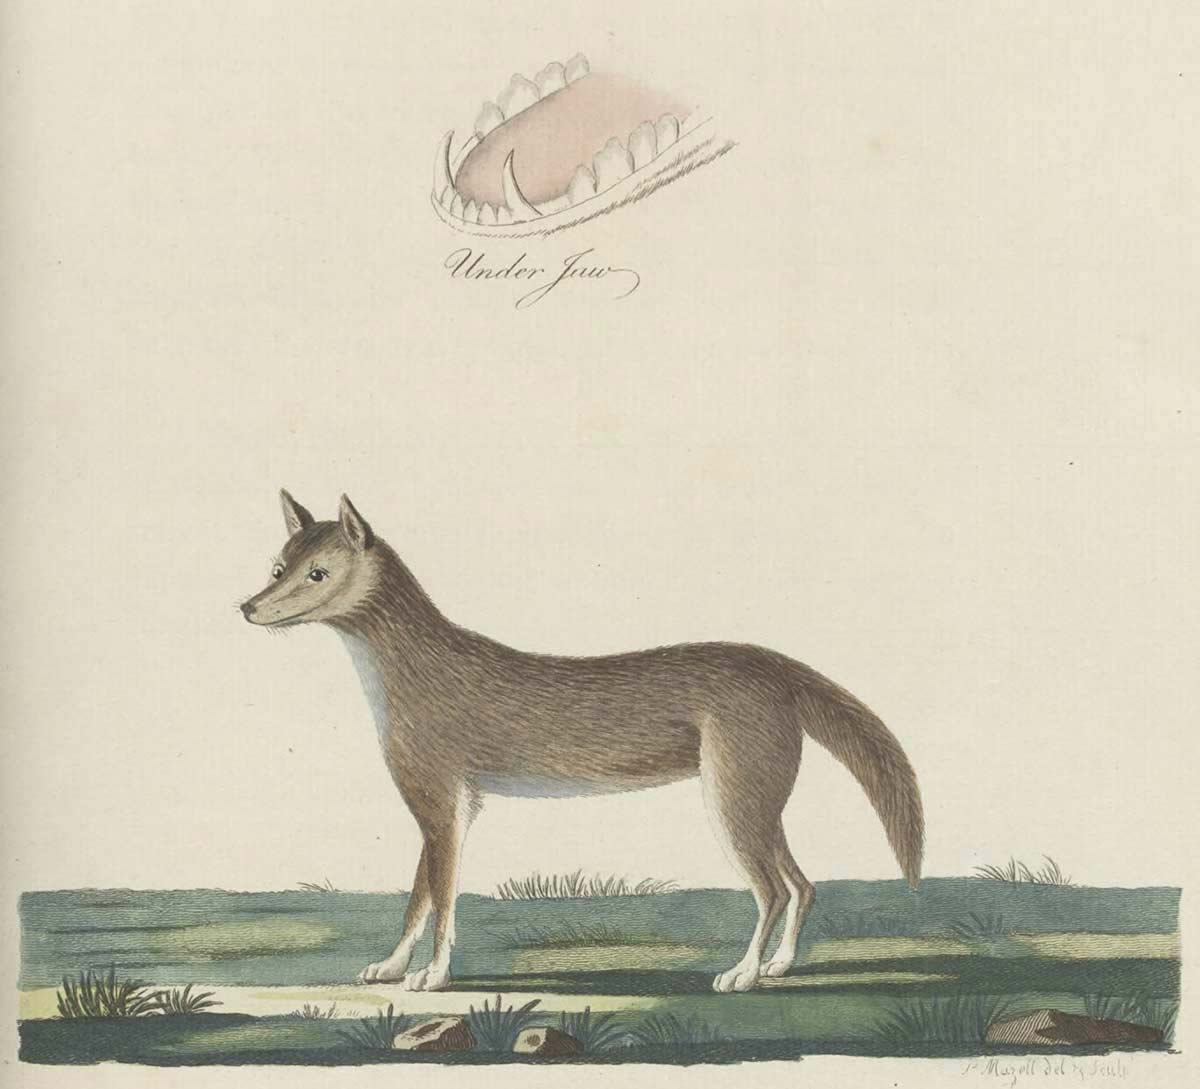 Arrival of the dingo | National Museum of Australia